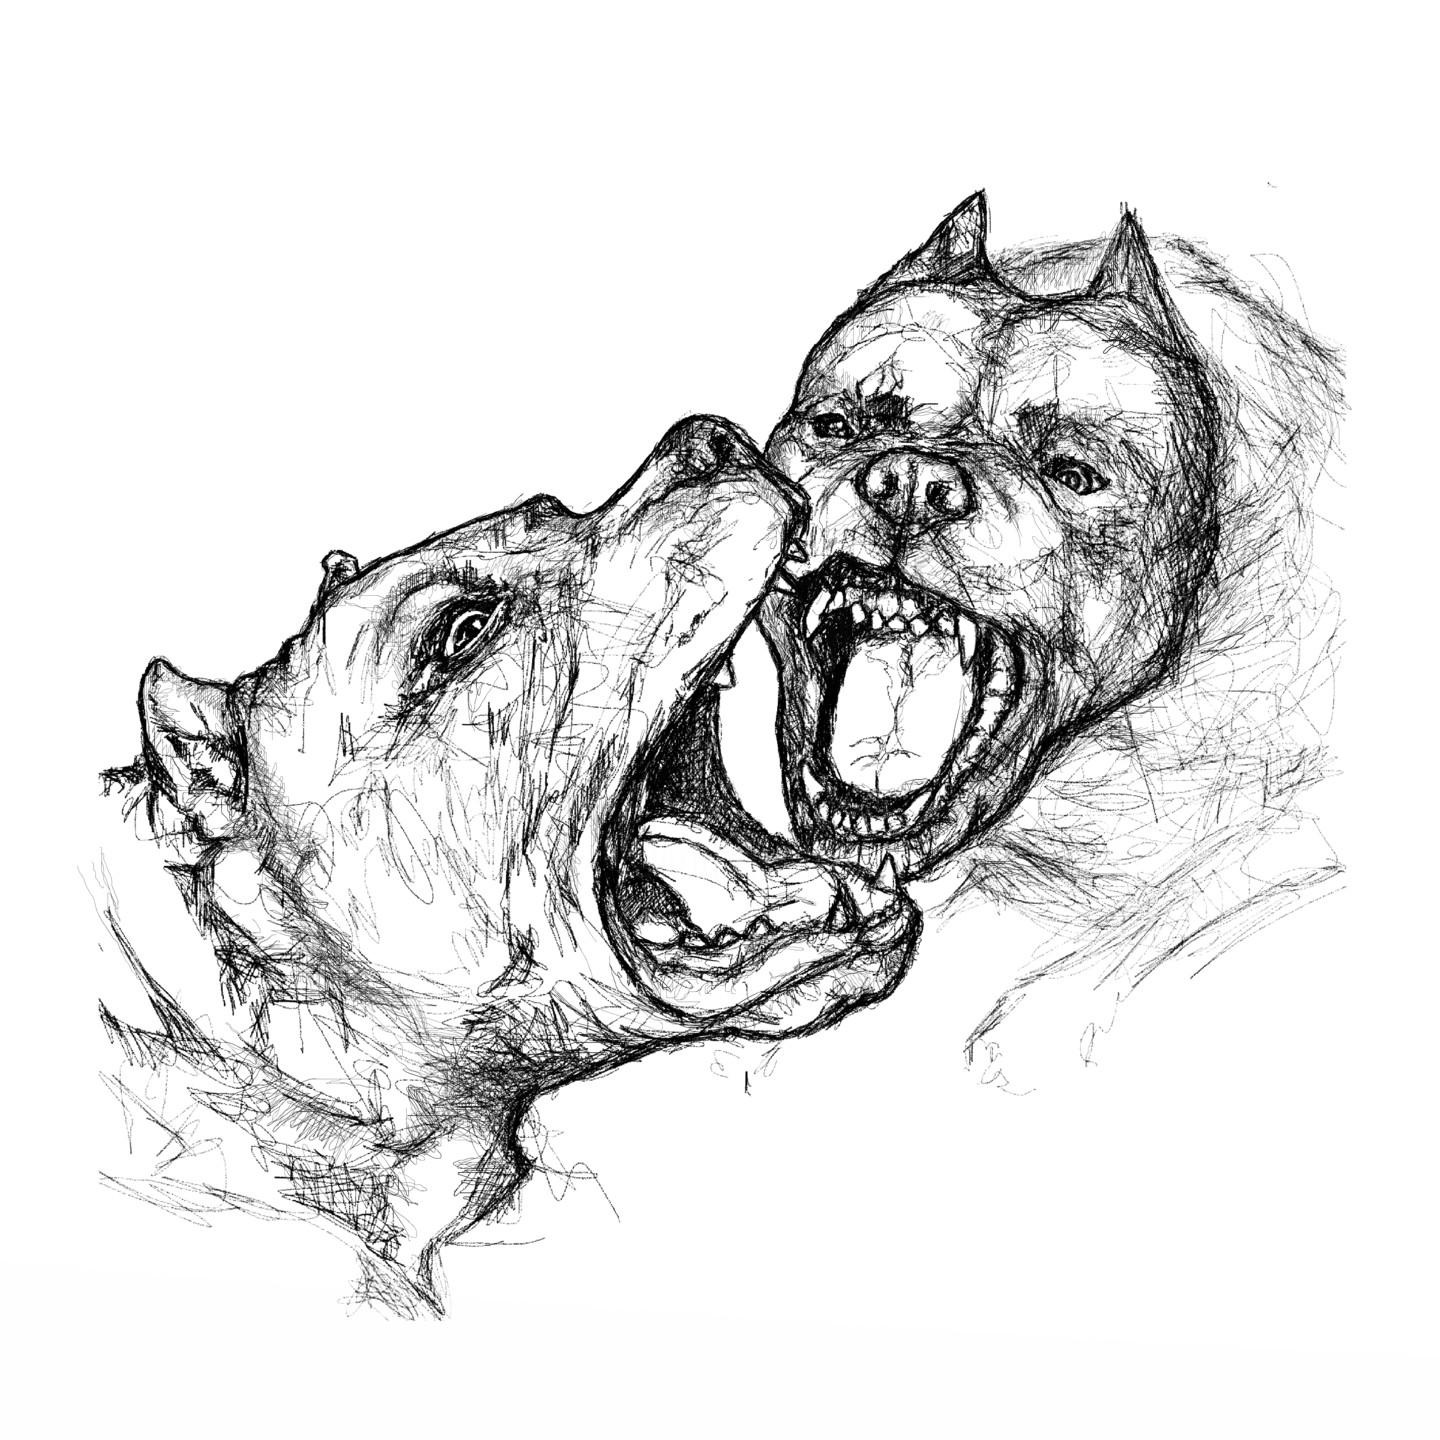 PitbullAttack., Drawing by Dmitry Payvin Artmajeur